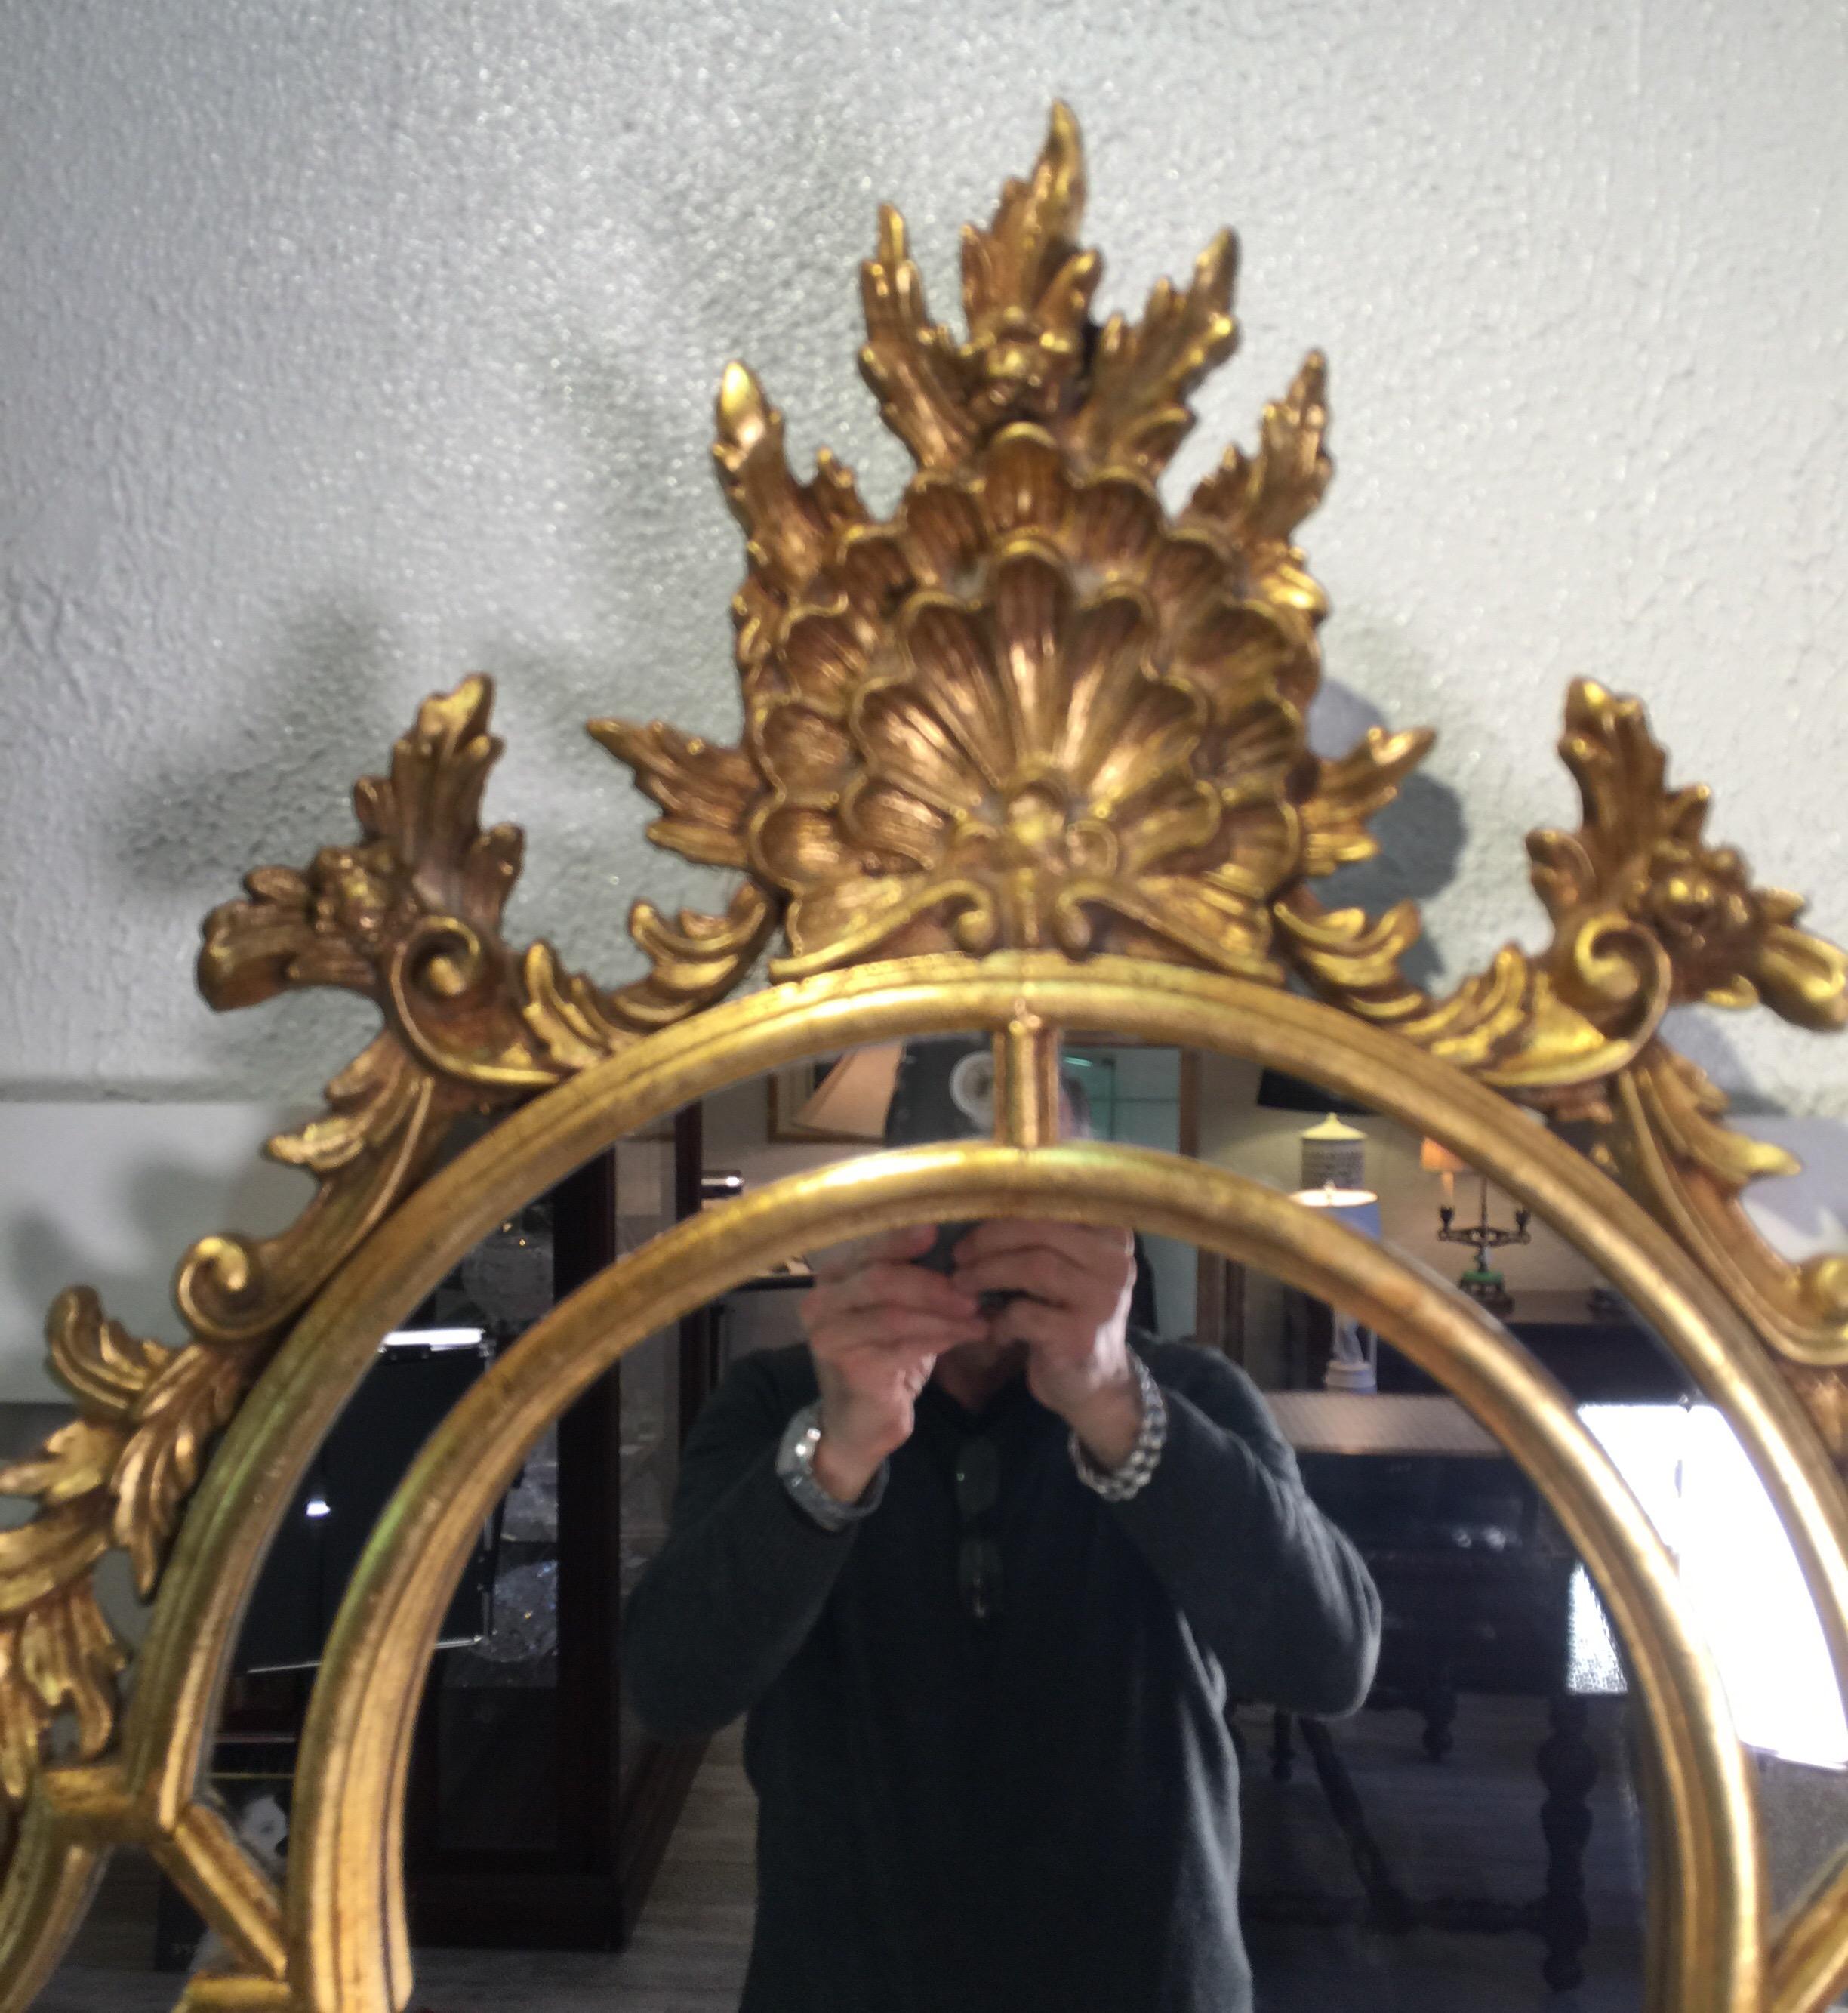 Gold giltwood Venetian mirror made in Italy by Le Barge, nicely carved and very good original condition
Dimensions: 32.5